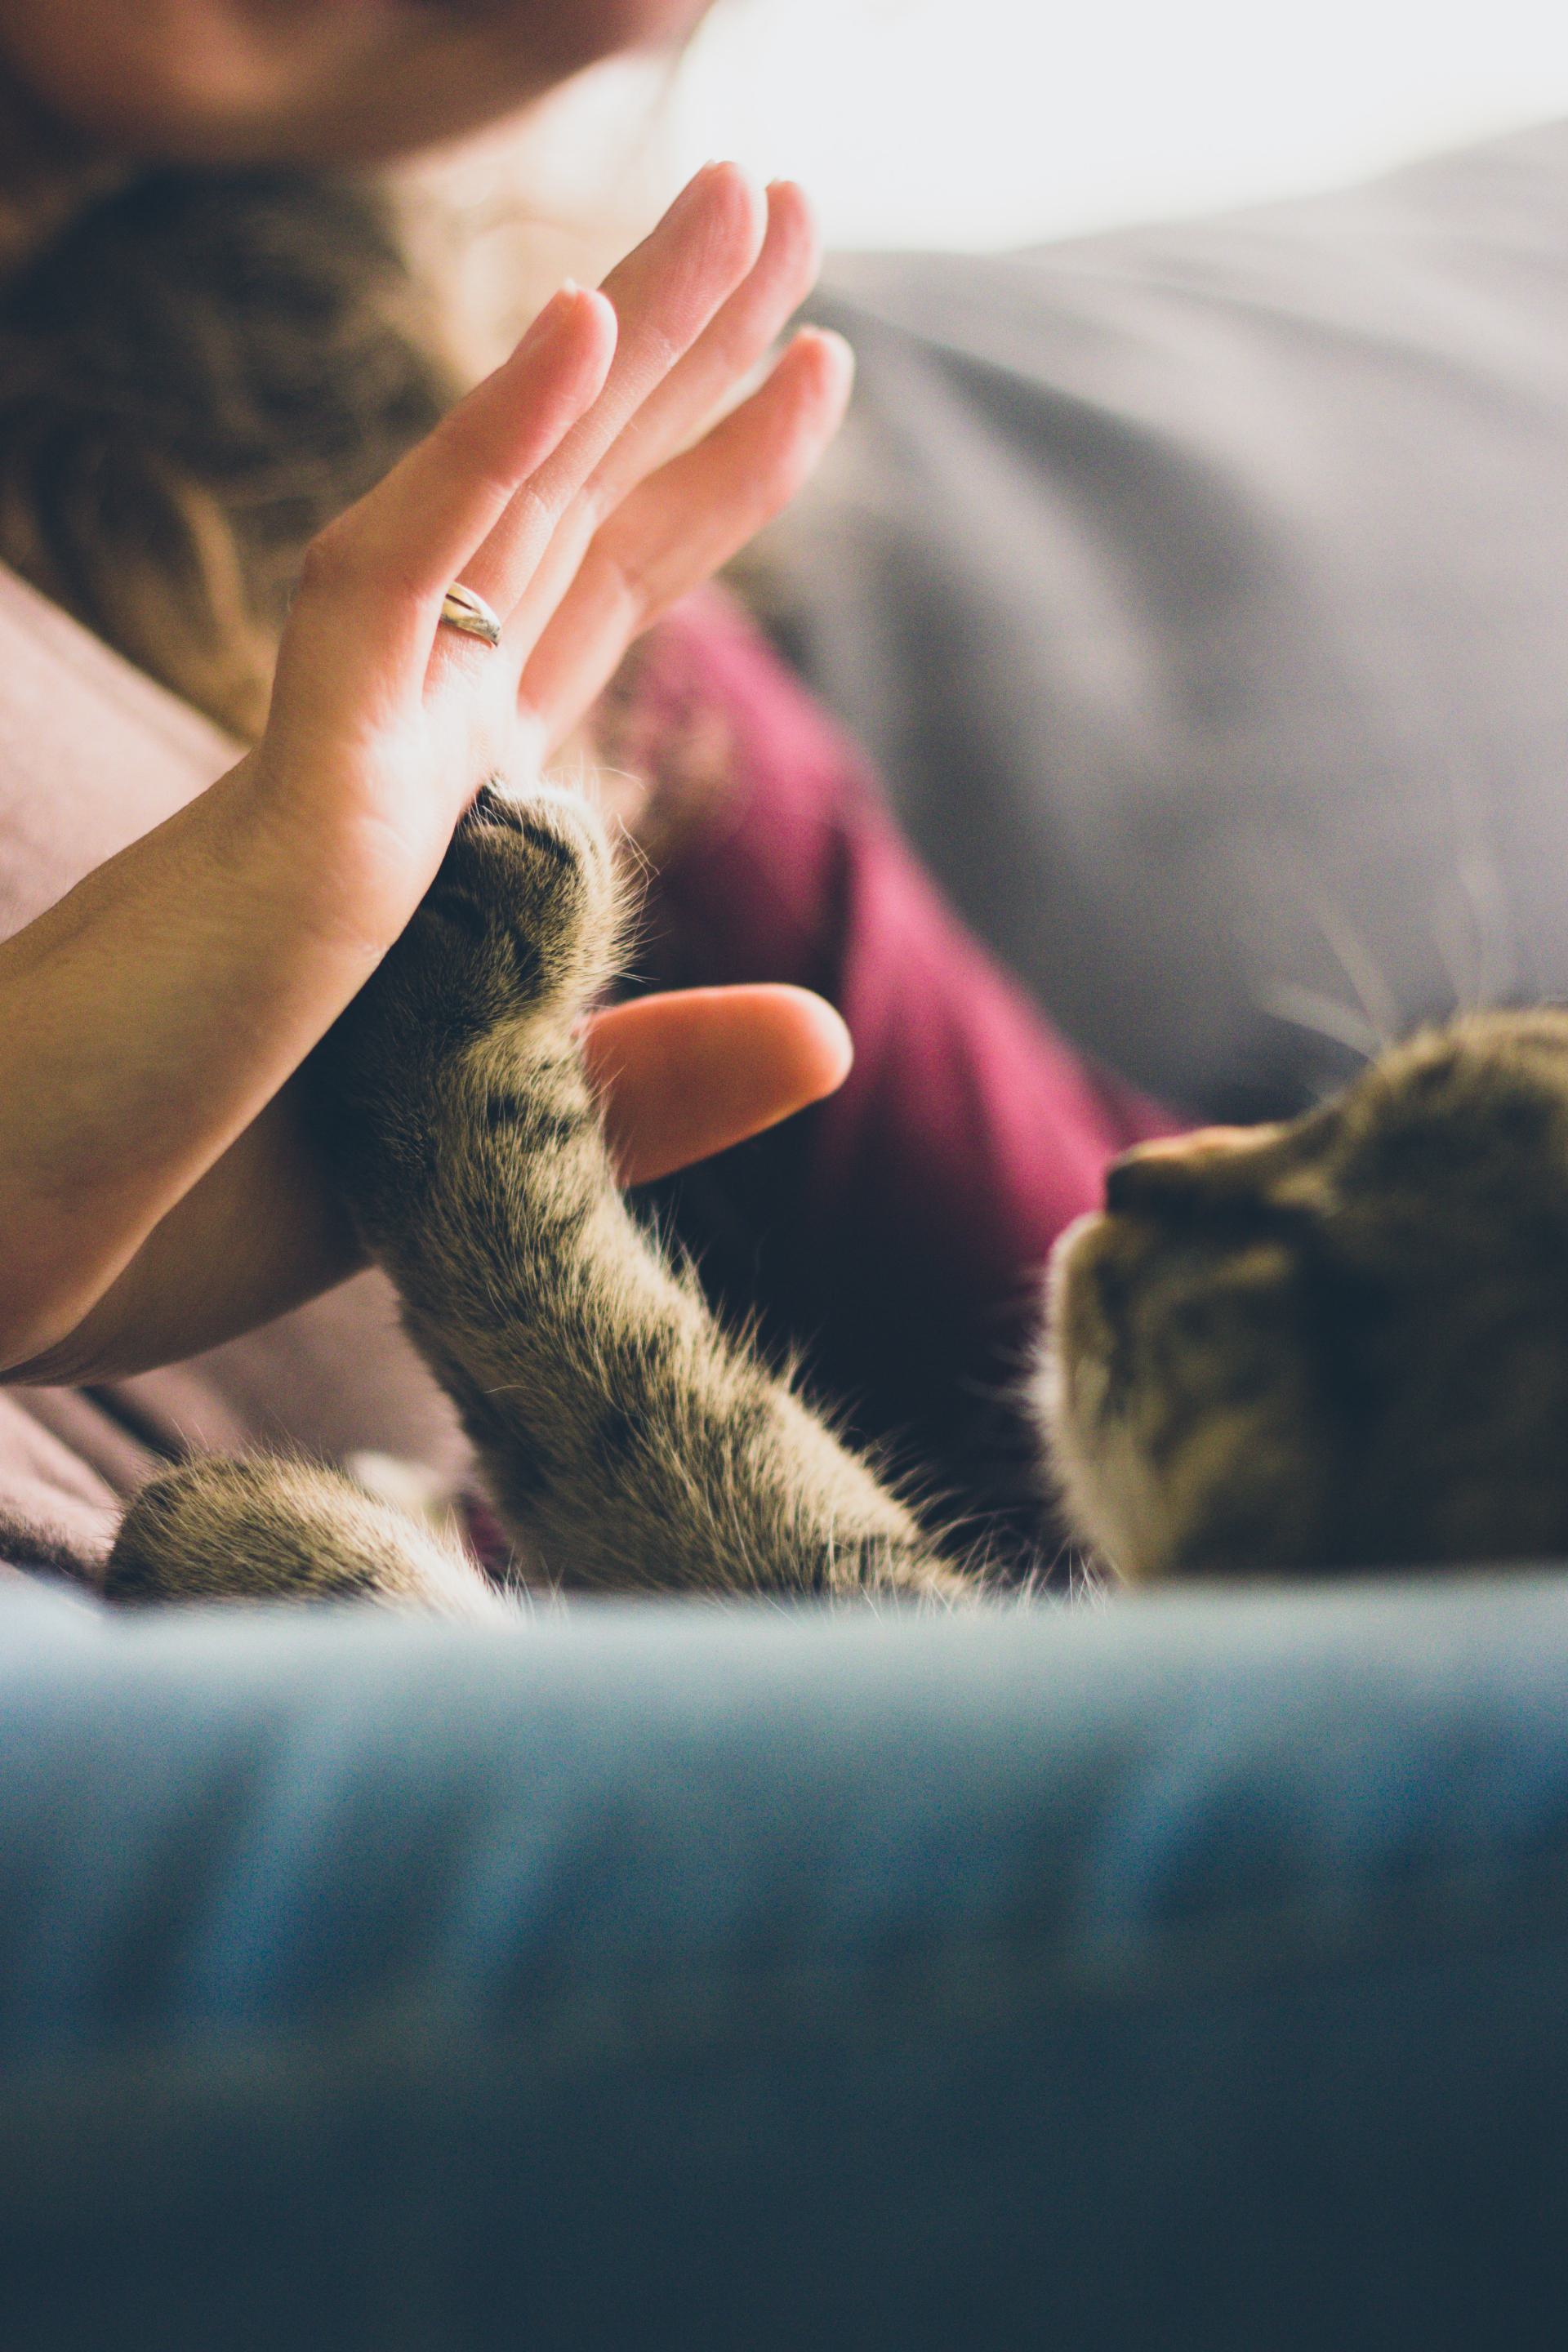 A close up of a palm to palm 'high five' between a cat and its owner on a couch.